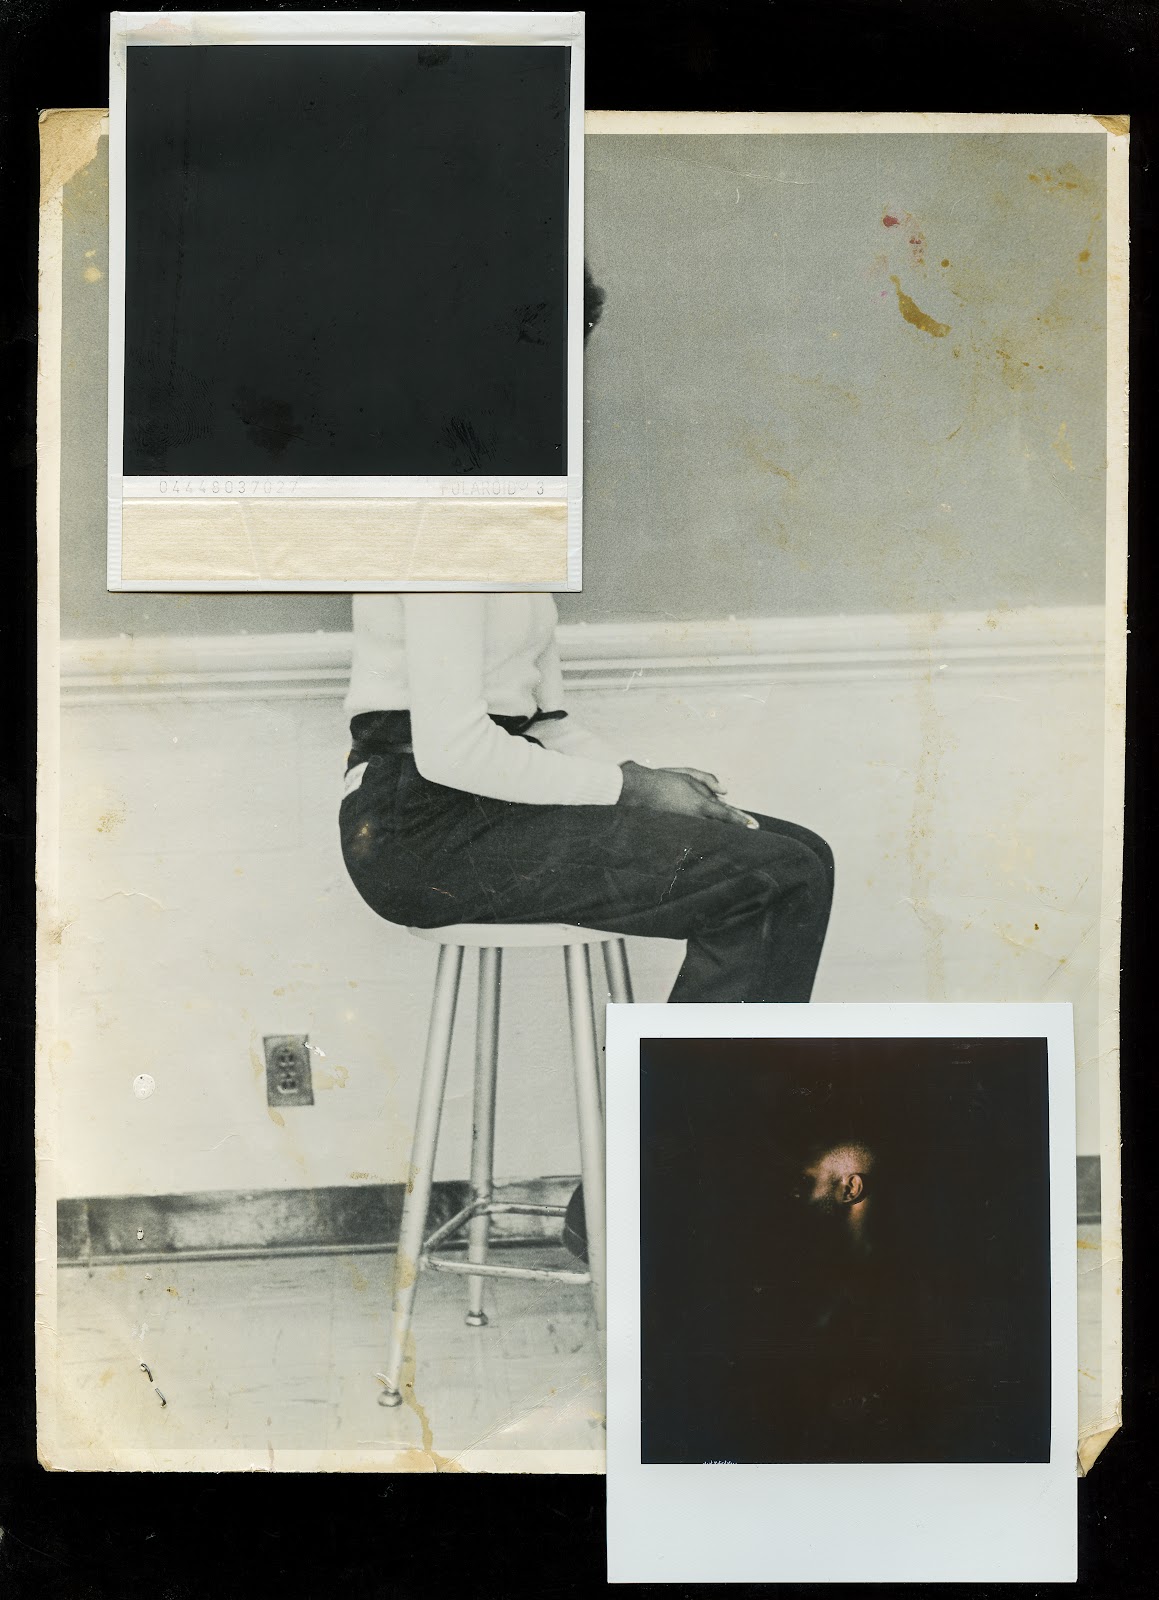 Image left: Shabez Jamal, Untitled (Page Reconstruction no. 85), 2023. In Untitled (Page Reconstruction no. 85), one large photograph of a person seated on a stool, seen from profile view. The photograph takes up the majority of the frame of the image. Covering the face and feet of the person in the image are two other Polaroids, one turned facedown, the other showing a spotlight on a person's face as they turn away from the camera. Photo courtesy of Shabez Jamal.